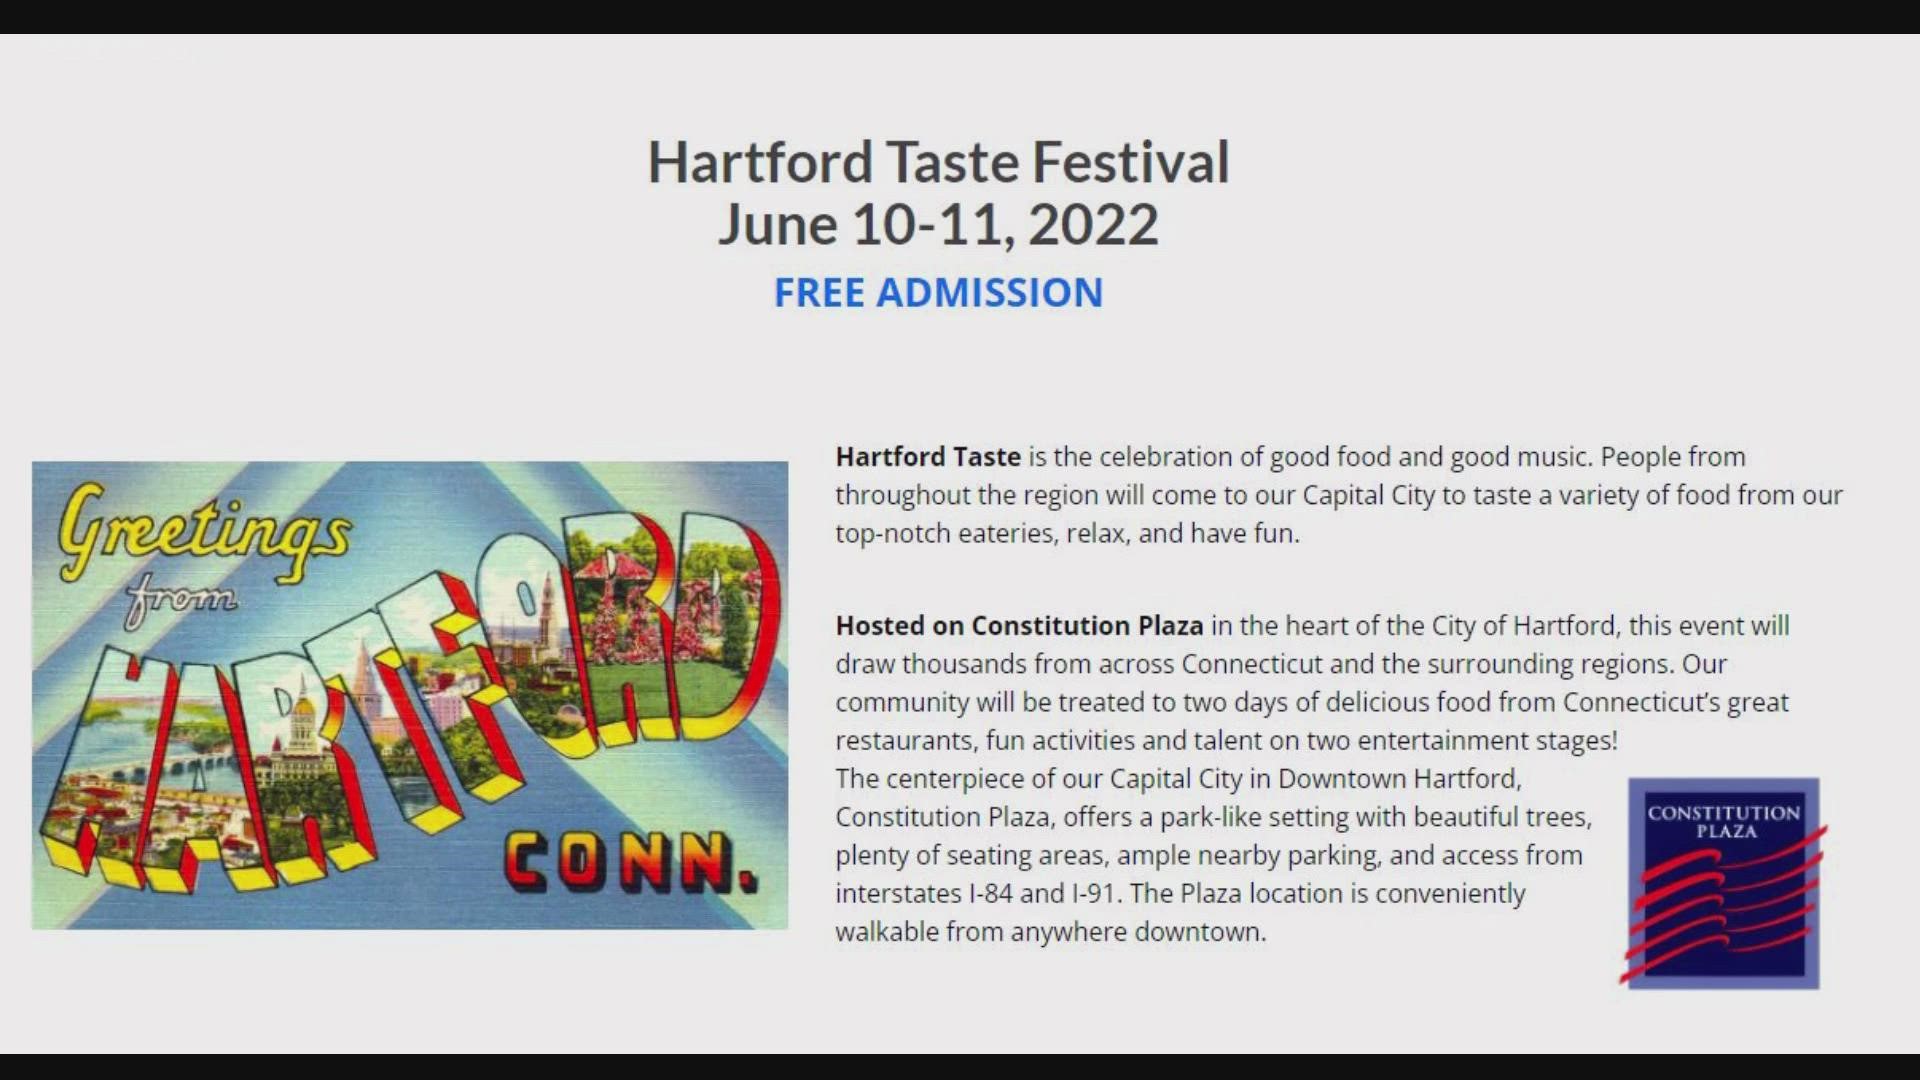 The Hartford Taste Festival will be held Friday and Saturday from 11 a.m. to 10 p.m. at Constitution Plaza.